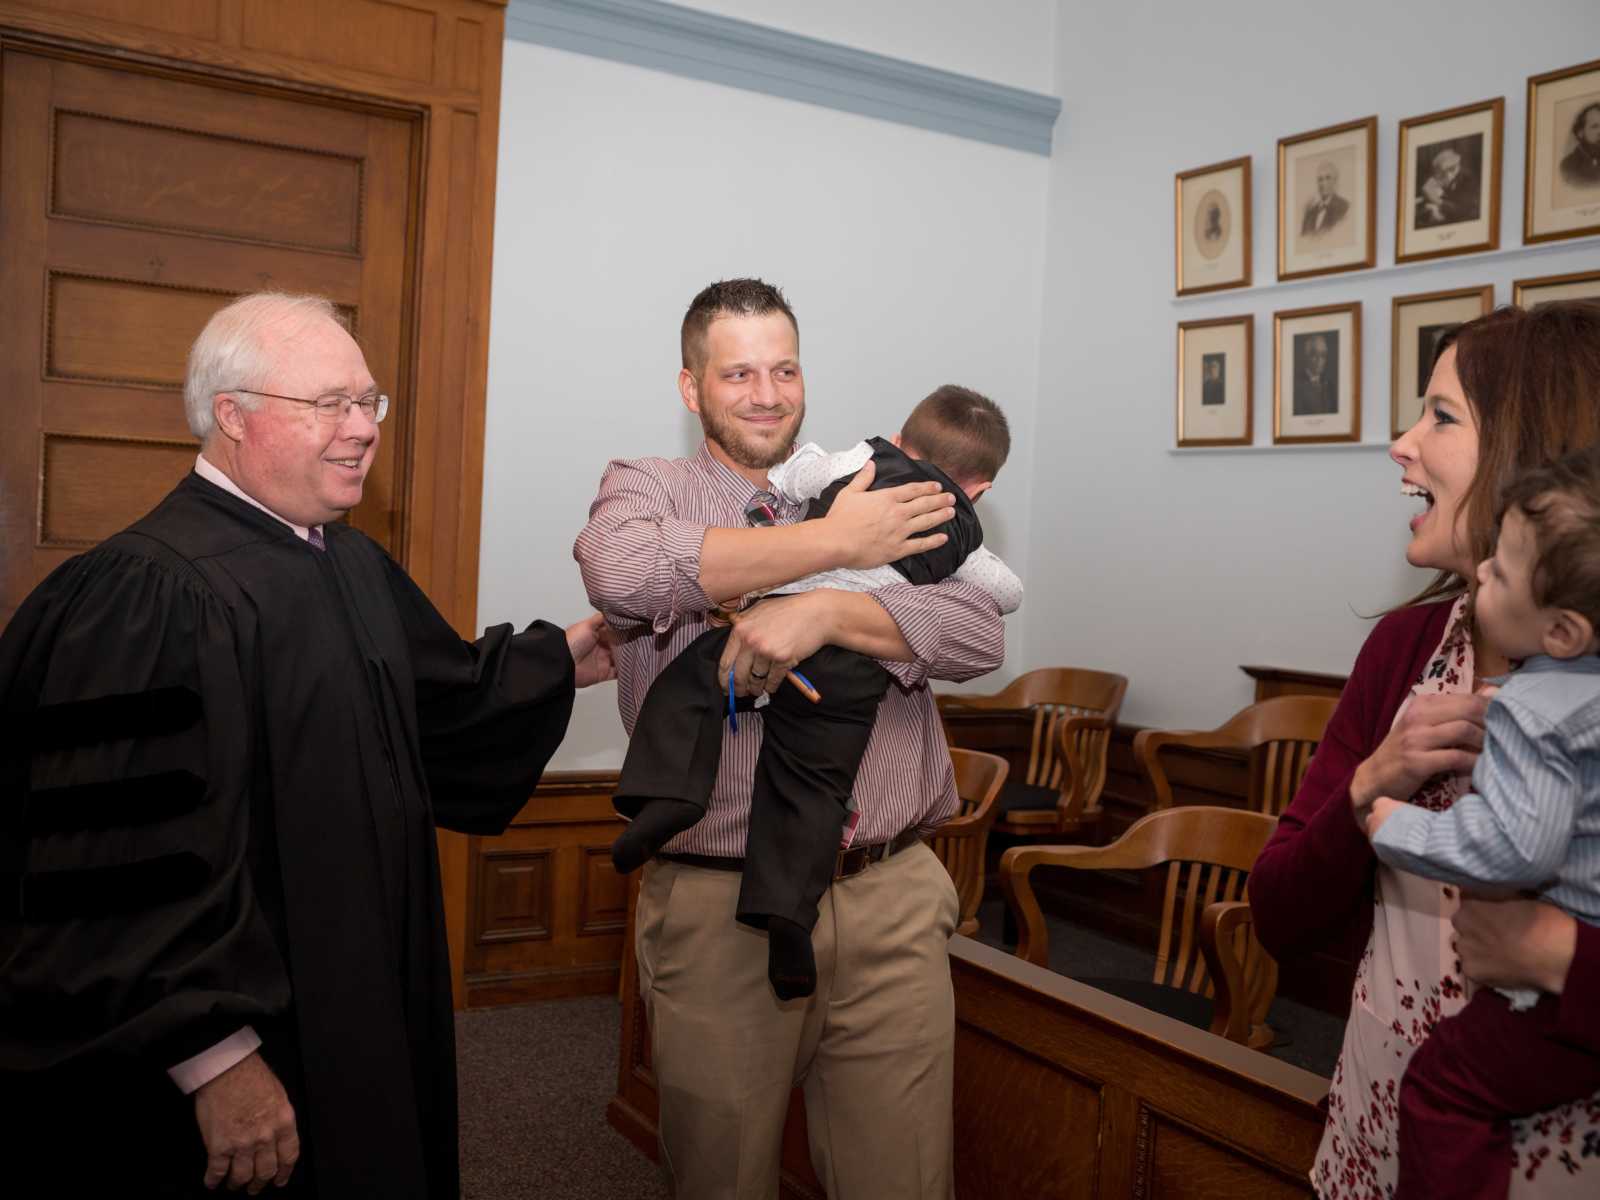 judge smiling at adoptive parents as father holds his son and wife holds other child